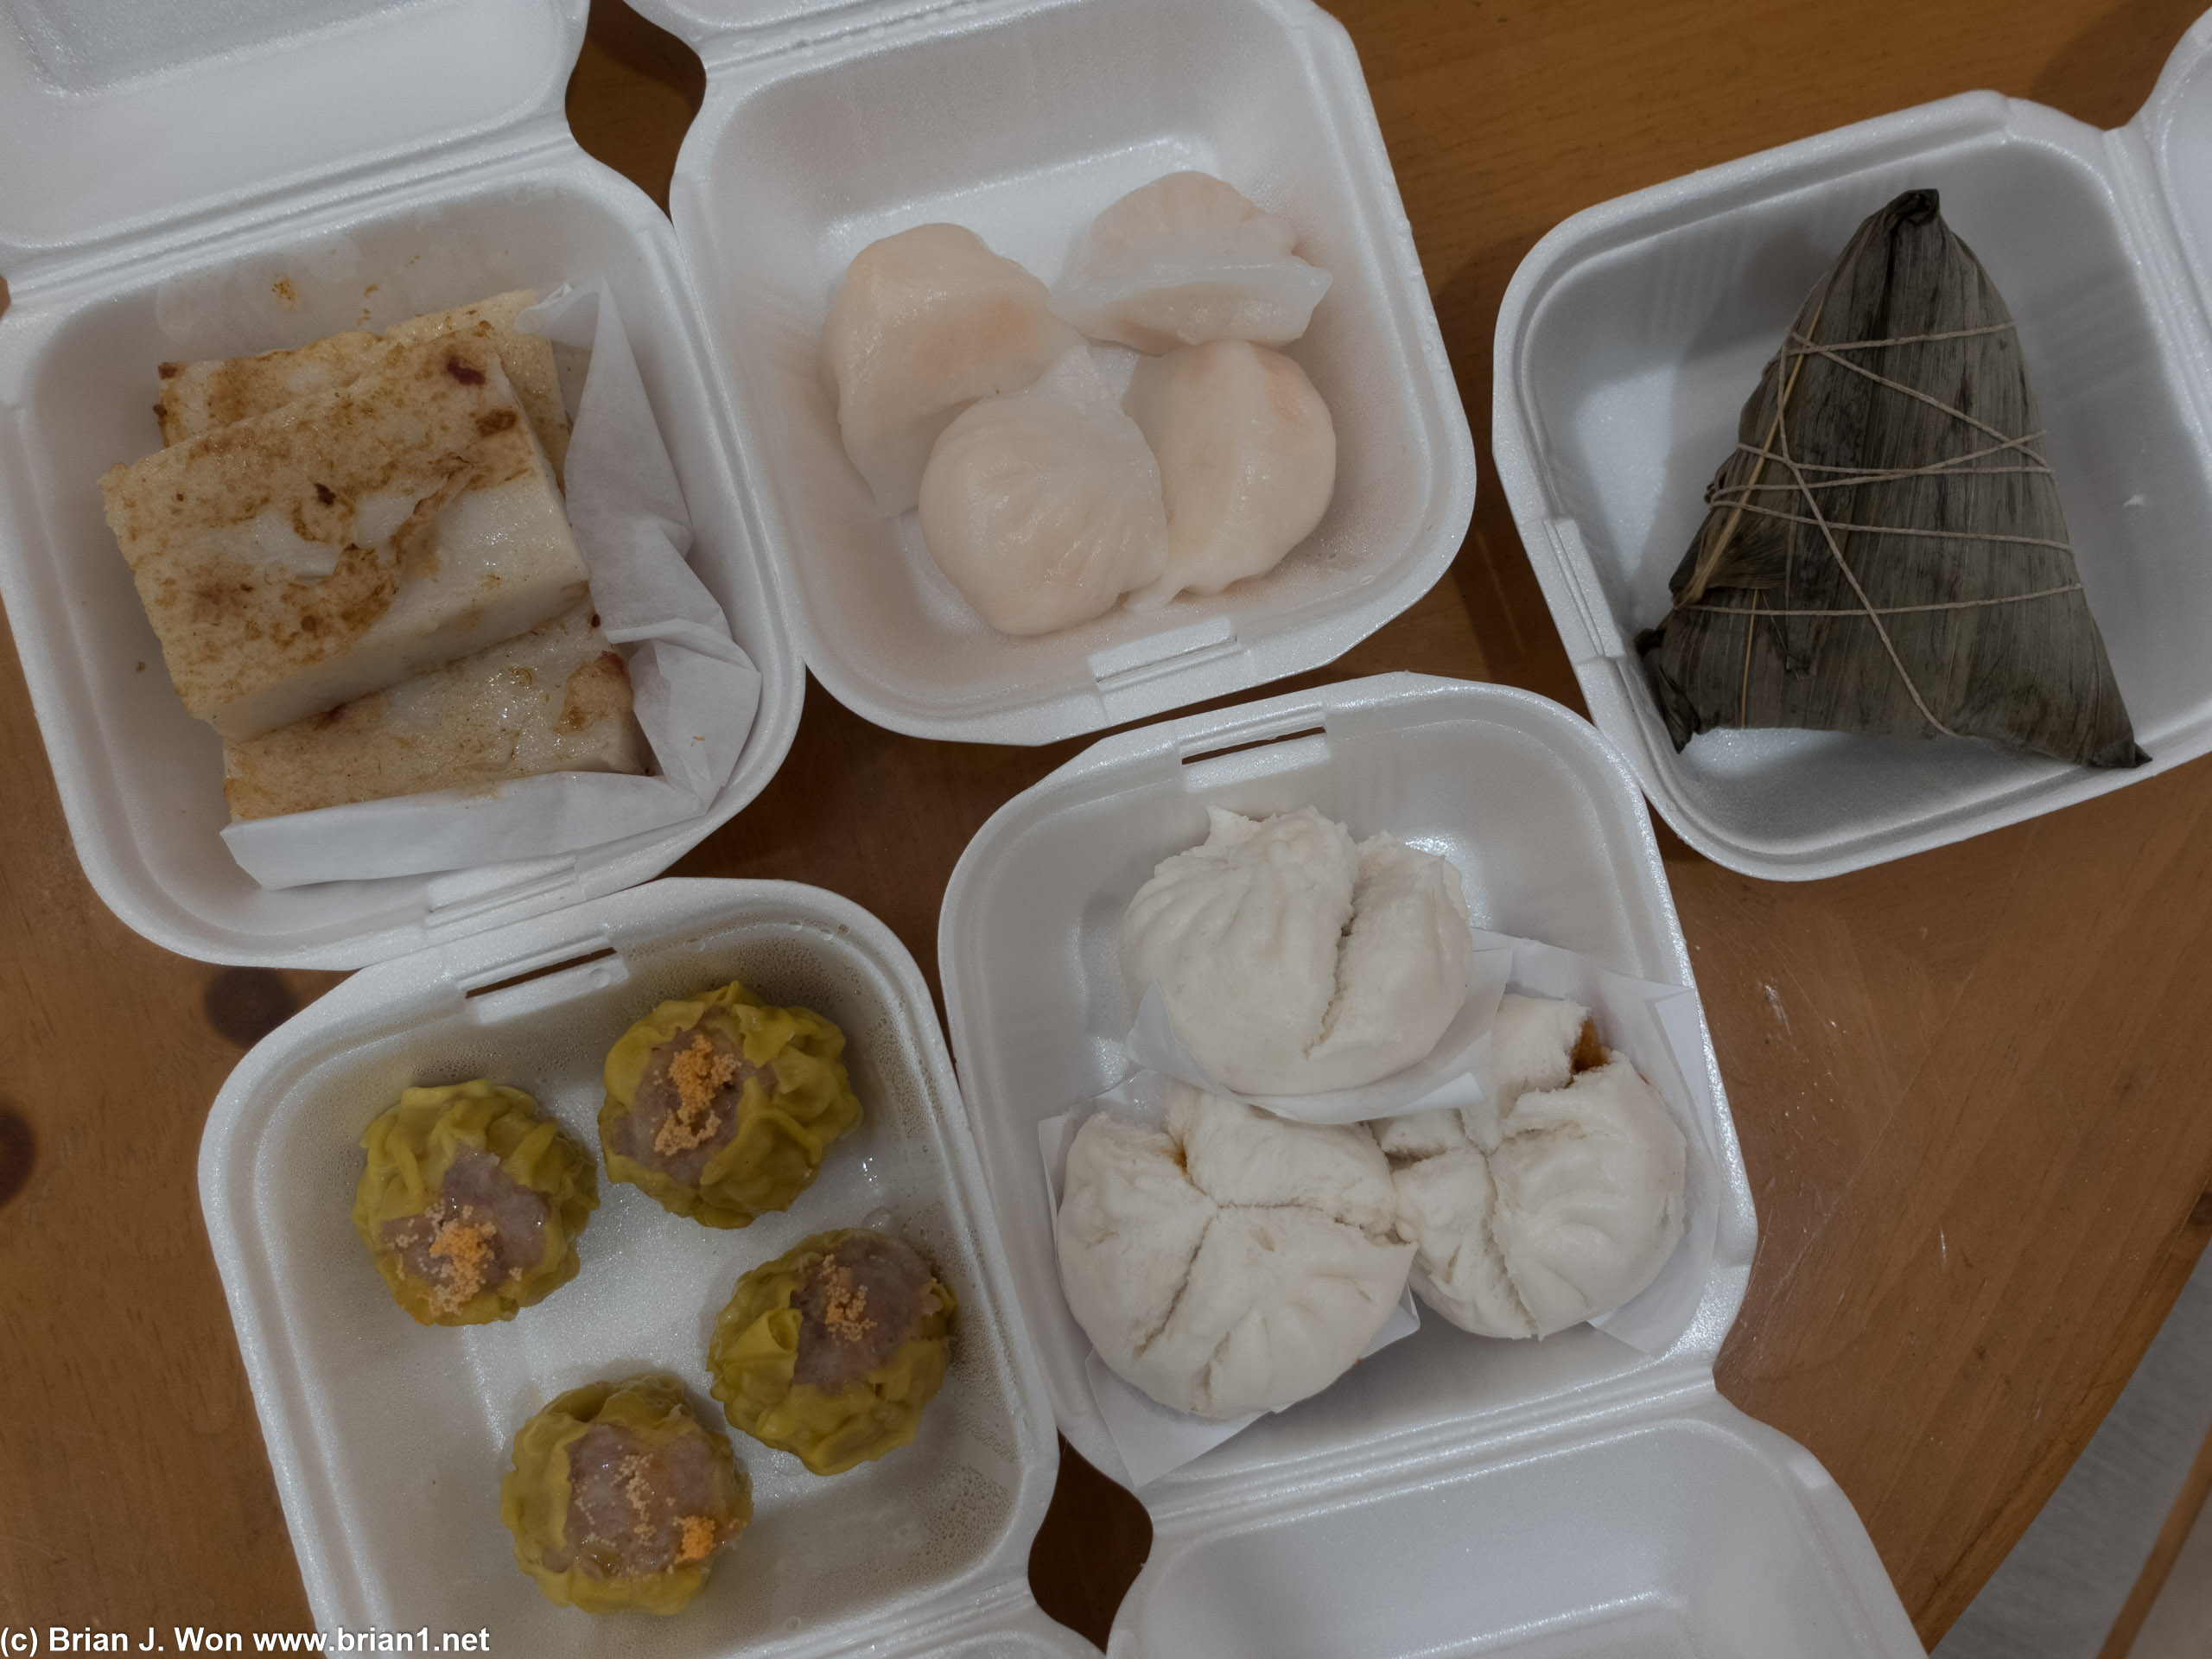 Can't expect much for to-go dim sum.